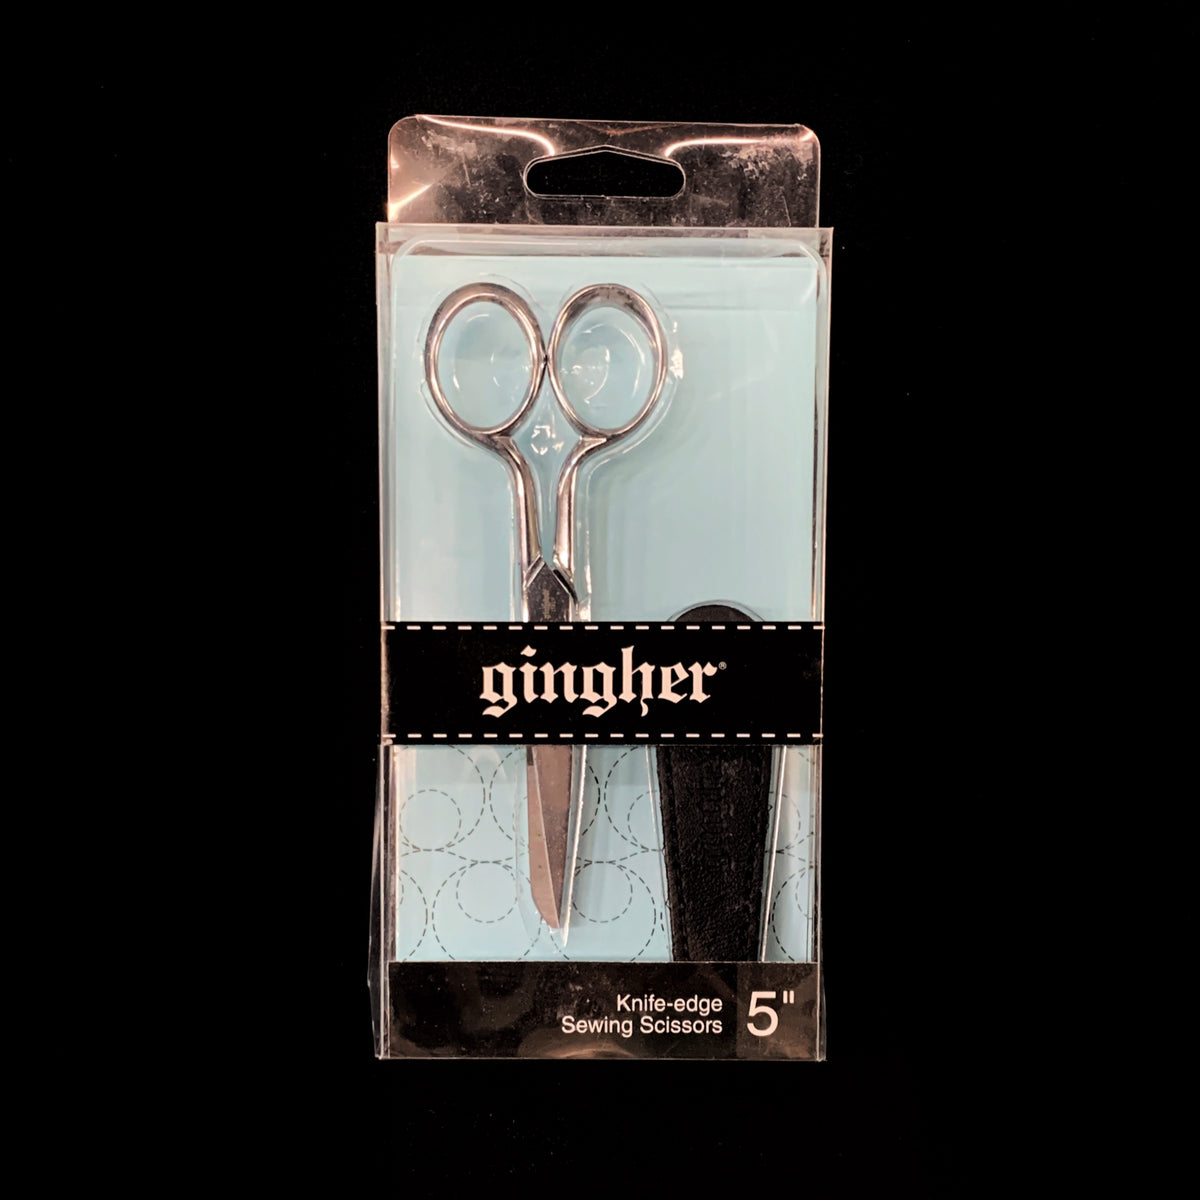 5 Knife Edge Sewing Scissors – gather here online